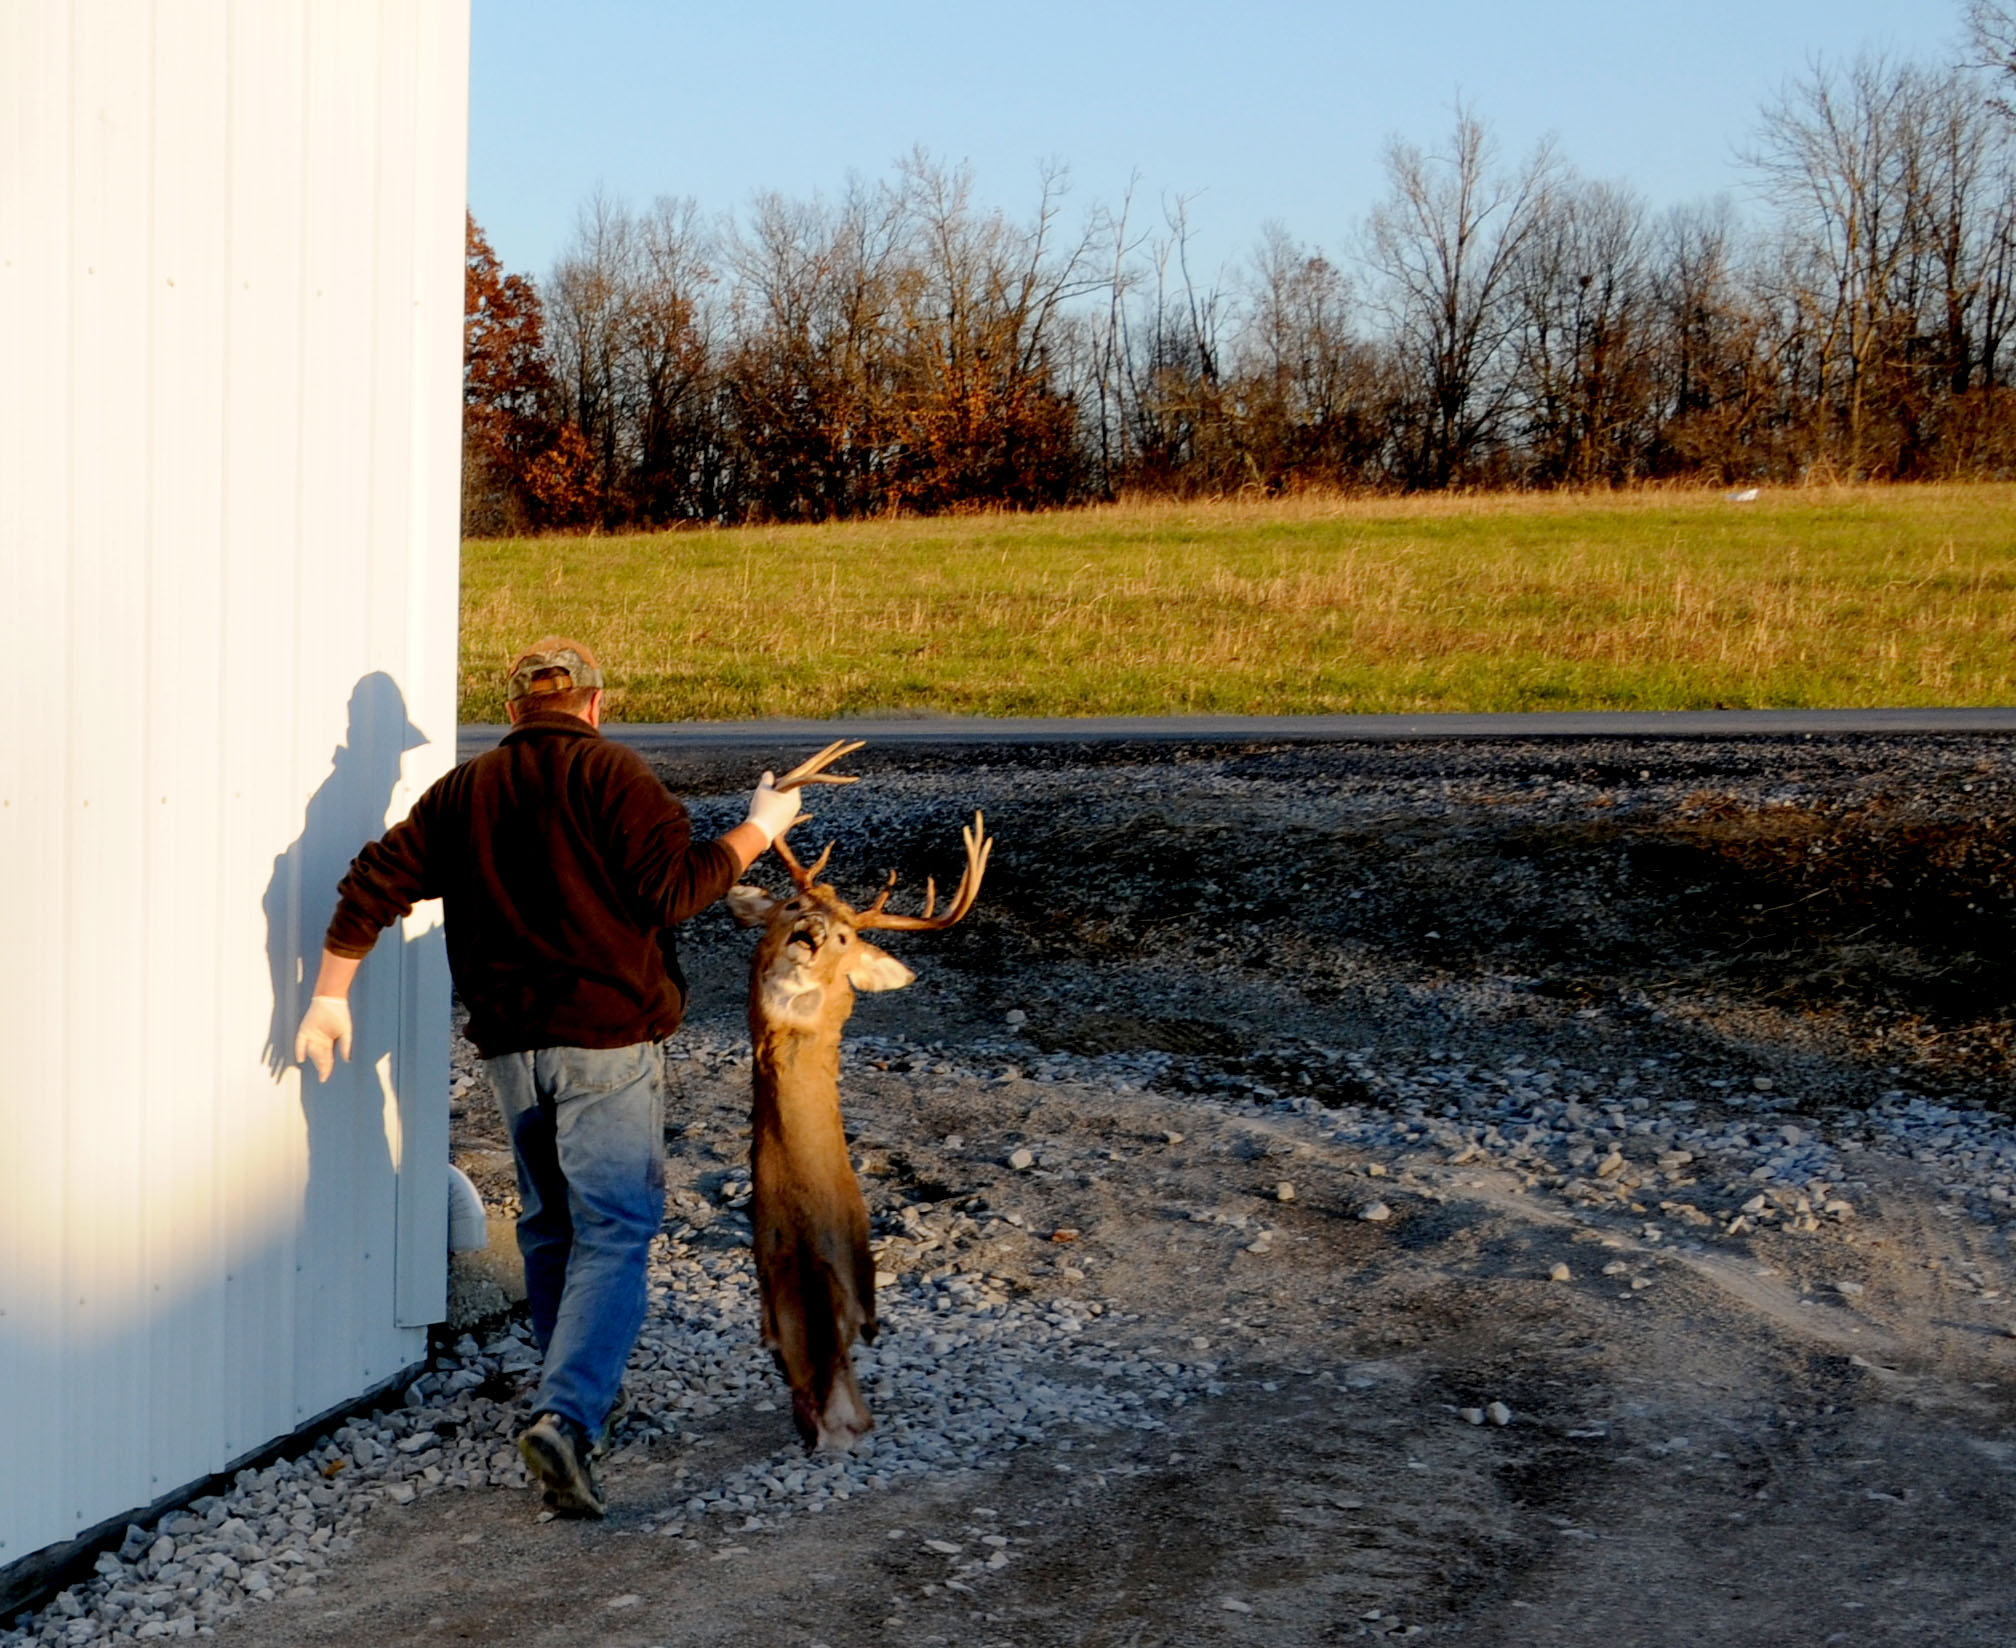  Jim McIntosh takes a prepared deer into his shop, 'Jims New Life Taxidermy' in Morgantown, Kentucky, on Friday, November sixteenth, to be further prepared for creating a wall mount. For an extra fee, McIntosh will help skin a deer outside his shop. 